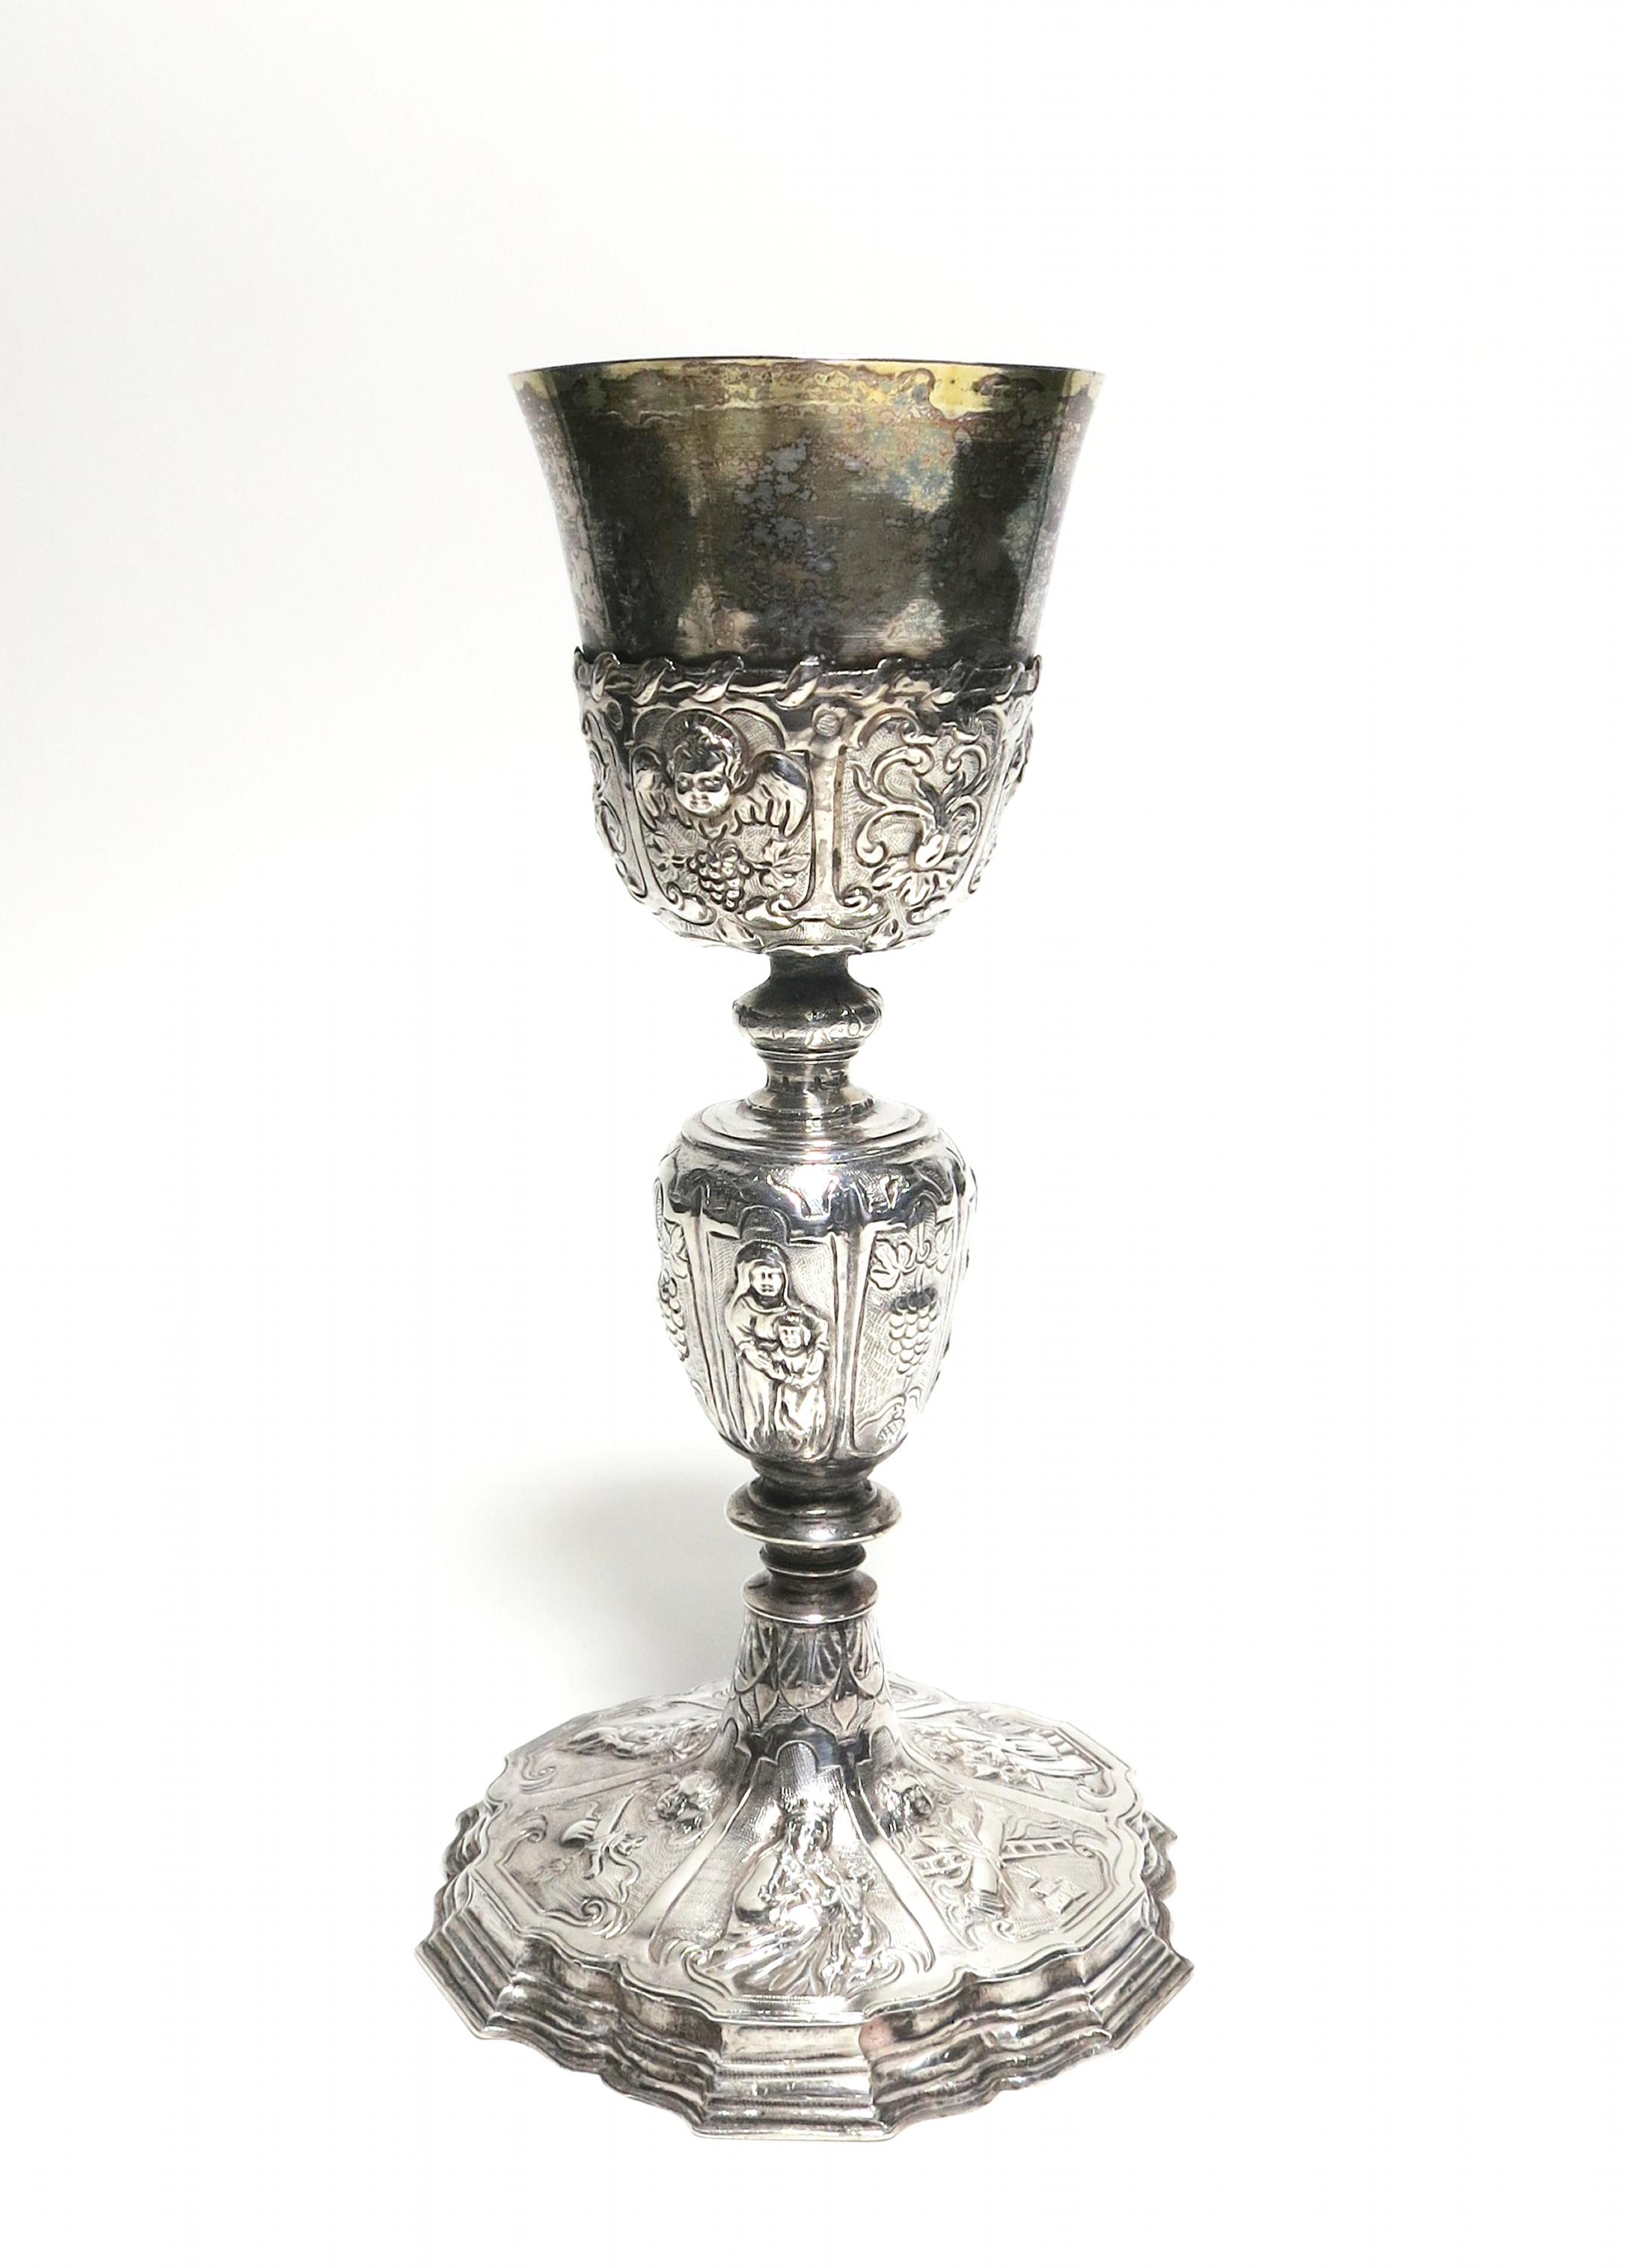 SILVER CHALICE WITH GILT BOWL. Presumably France. Date: 18th century. Technique: Silver, gilt cuppa. - Image 2 of 7